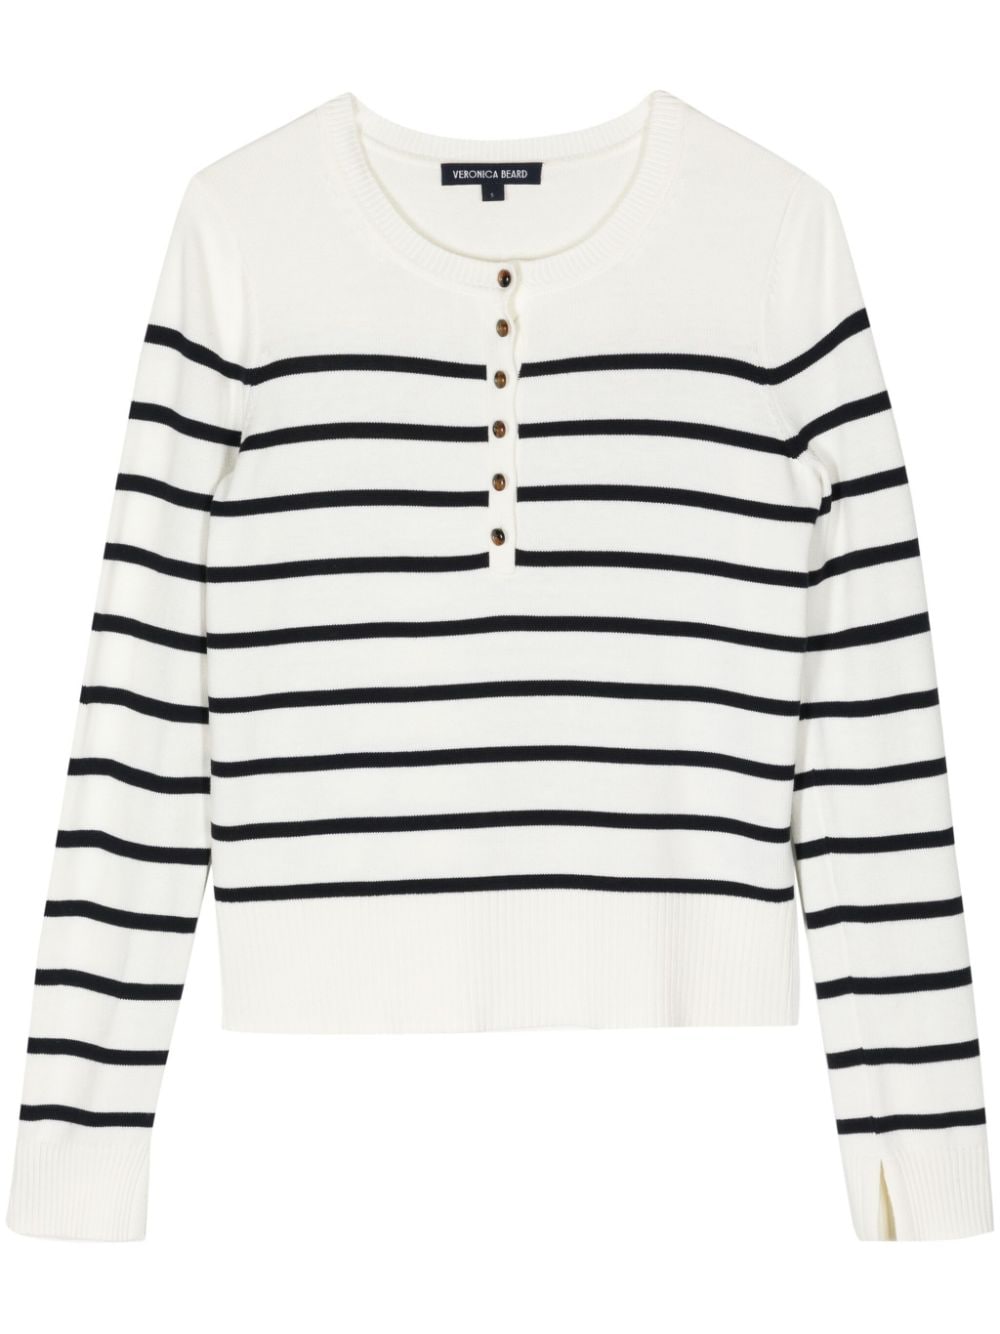 Veronica Beard Dianora Striped Knitted Top In White